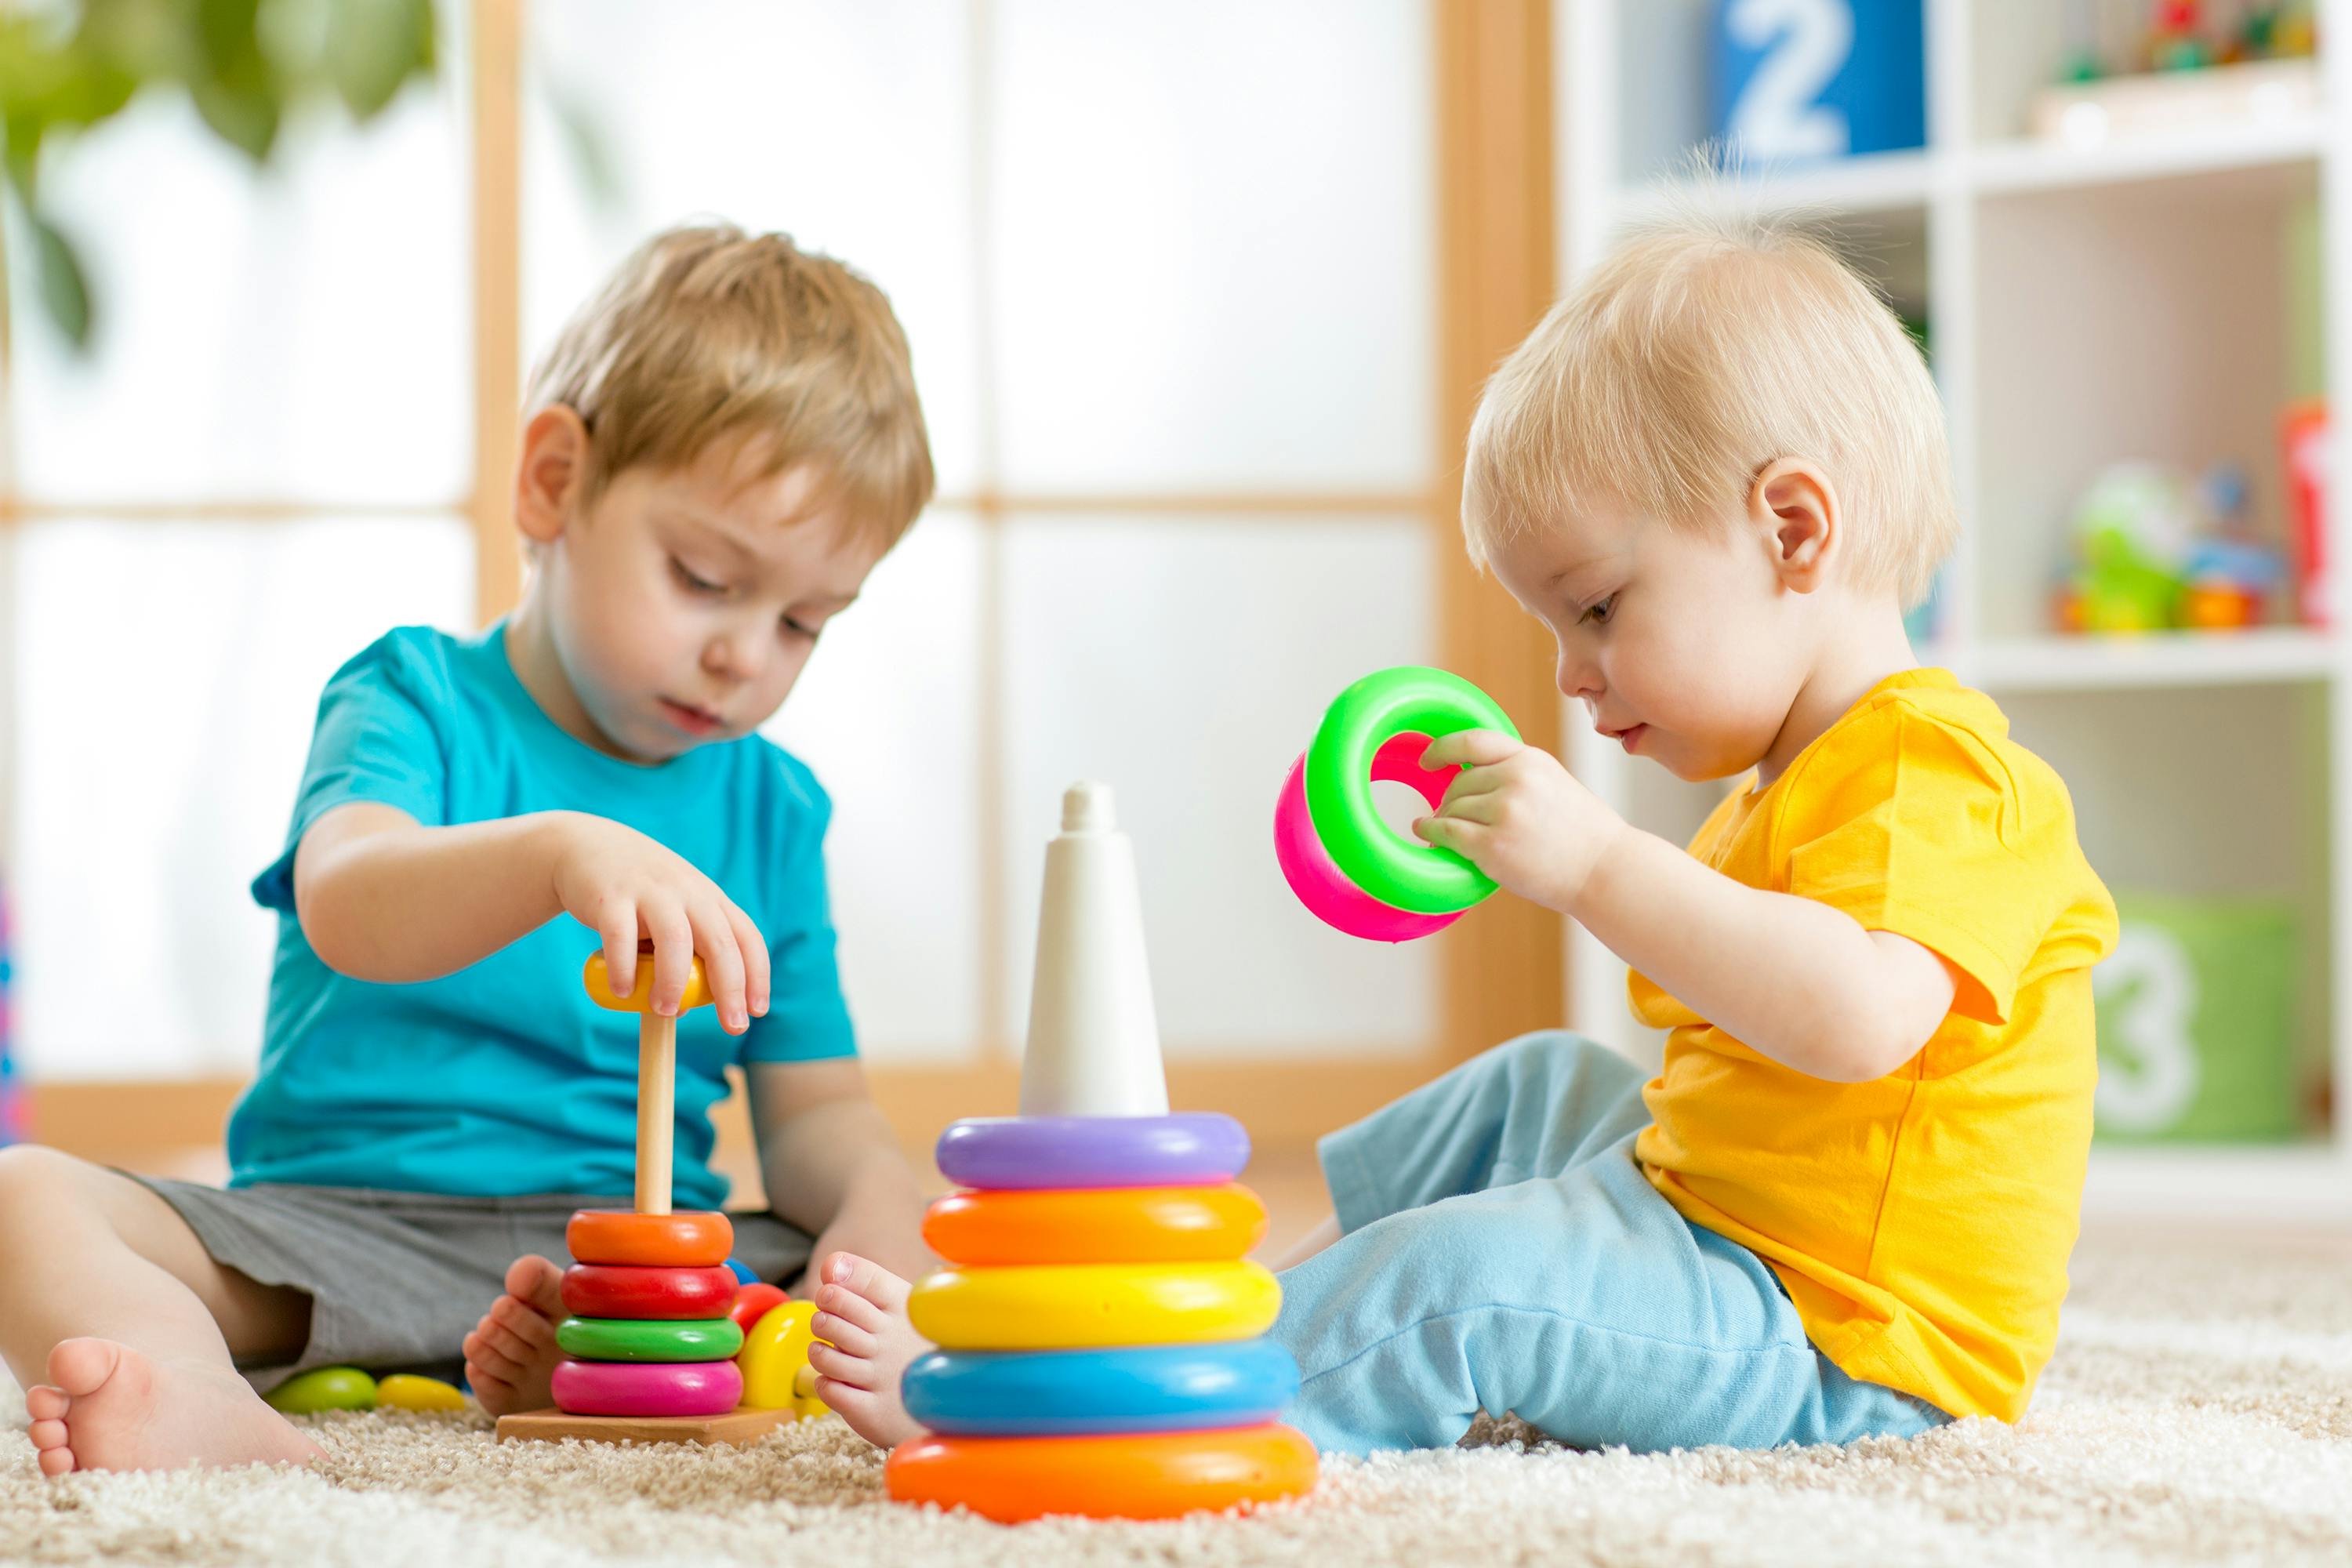 17+ Unique Toys Under $10 (That will Entertain Kids for Hours)